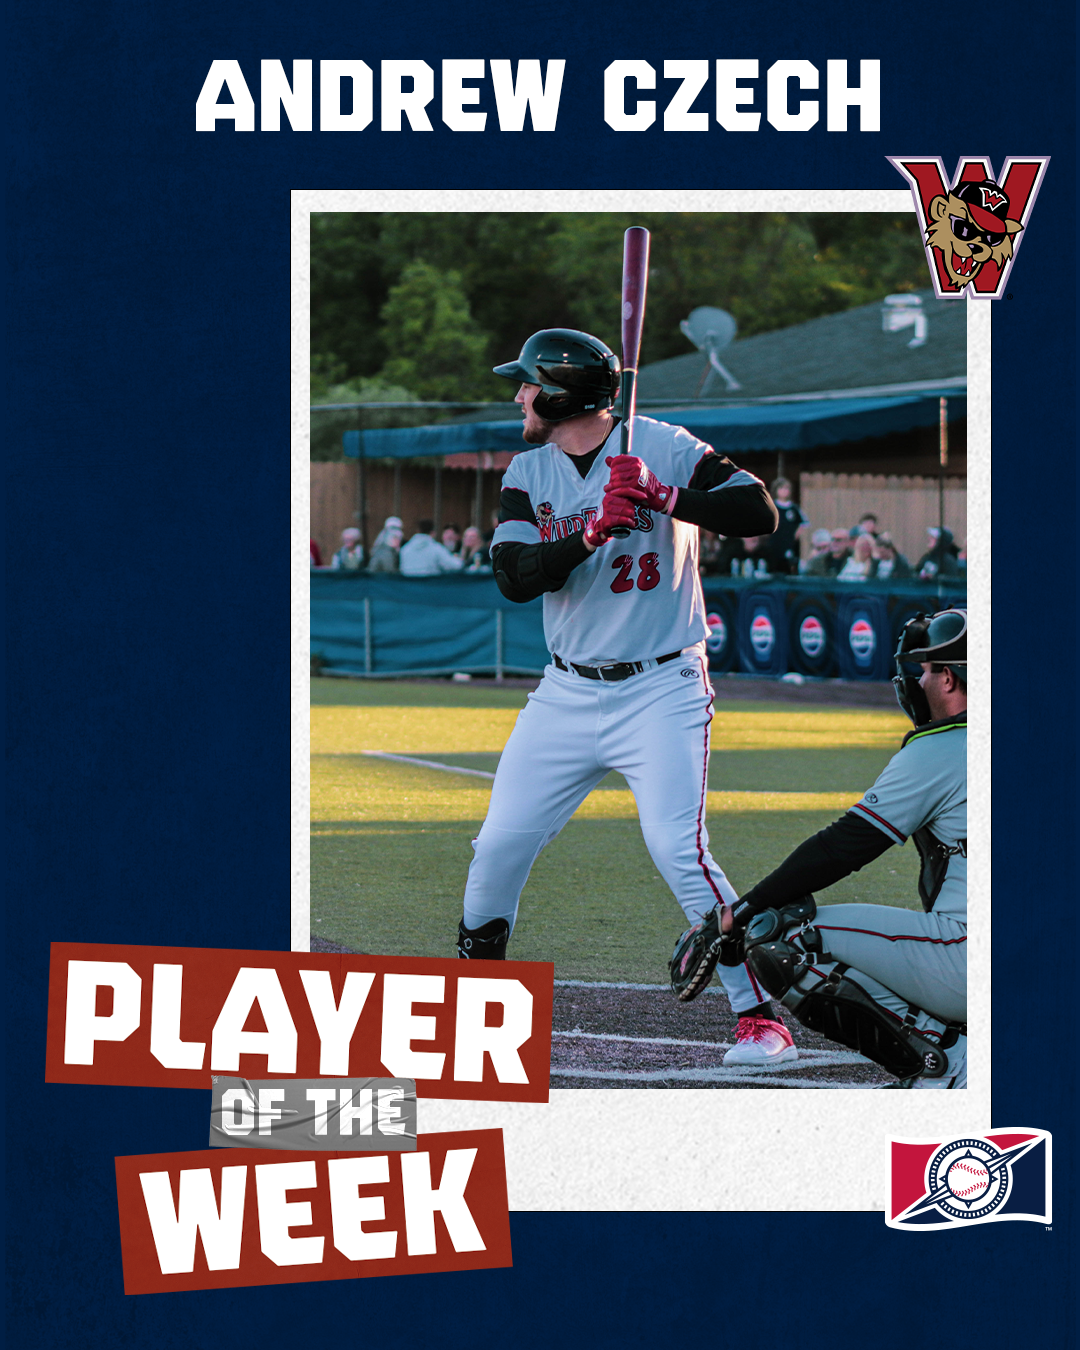 WASHINGTON'S ANDREW CZECH WINS PLAYER OF THE WEEK